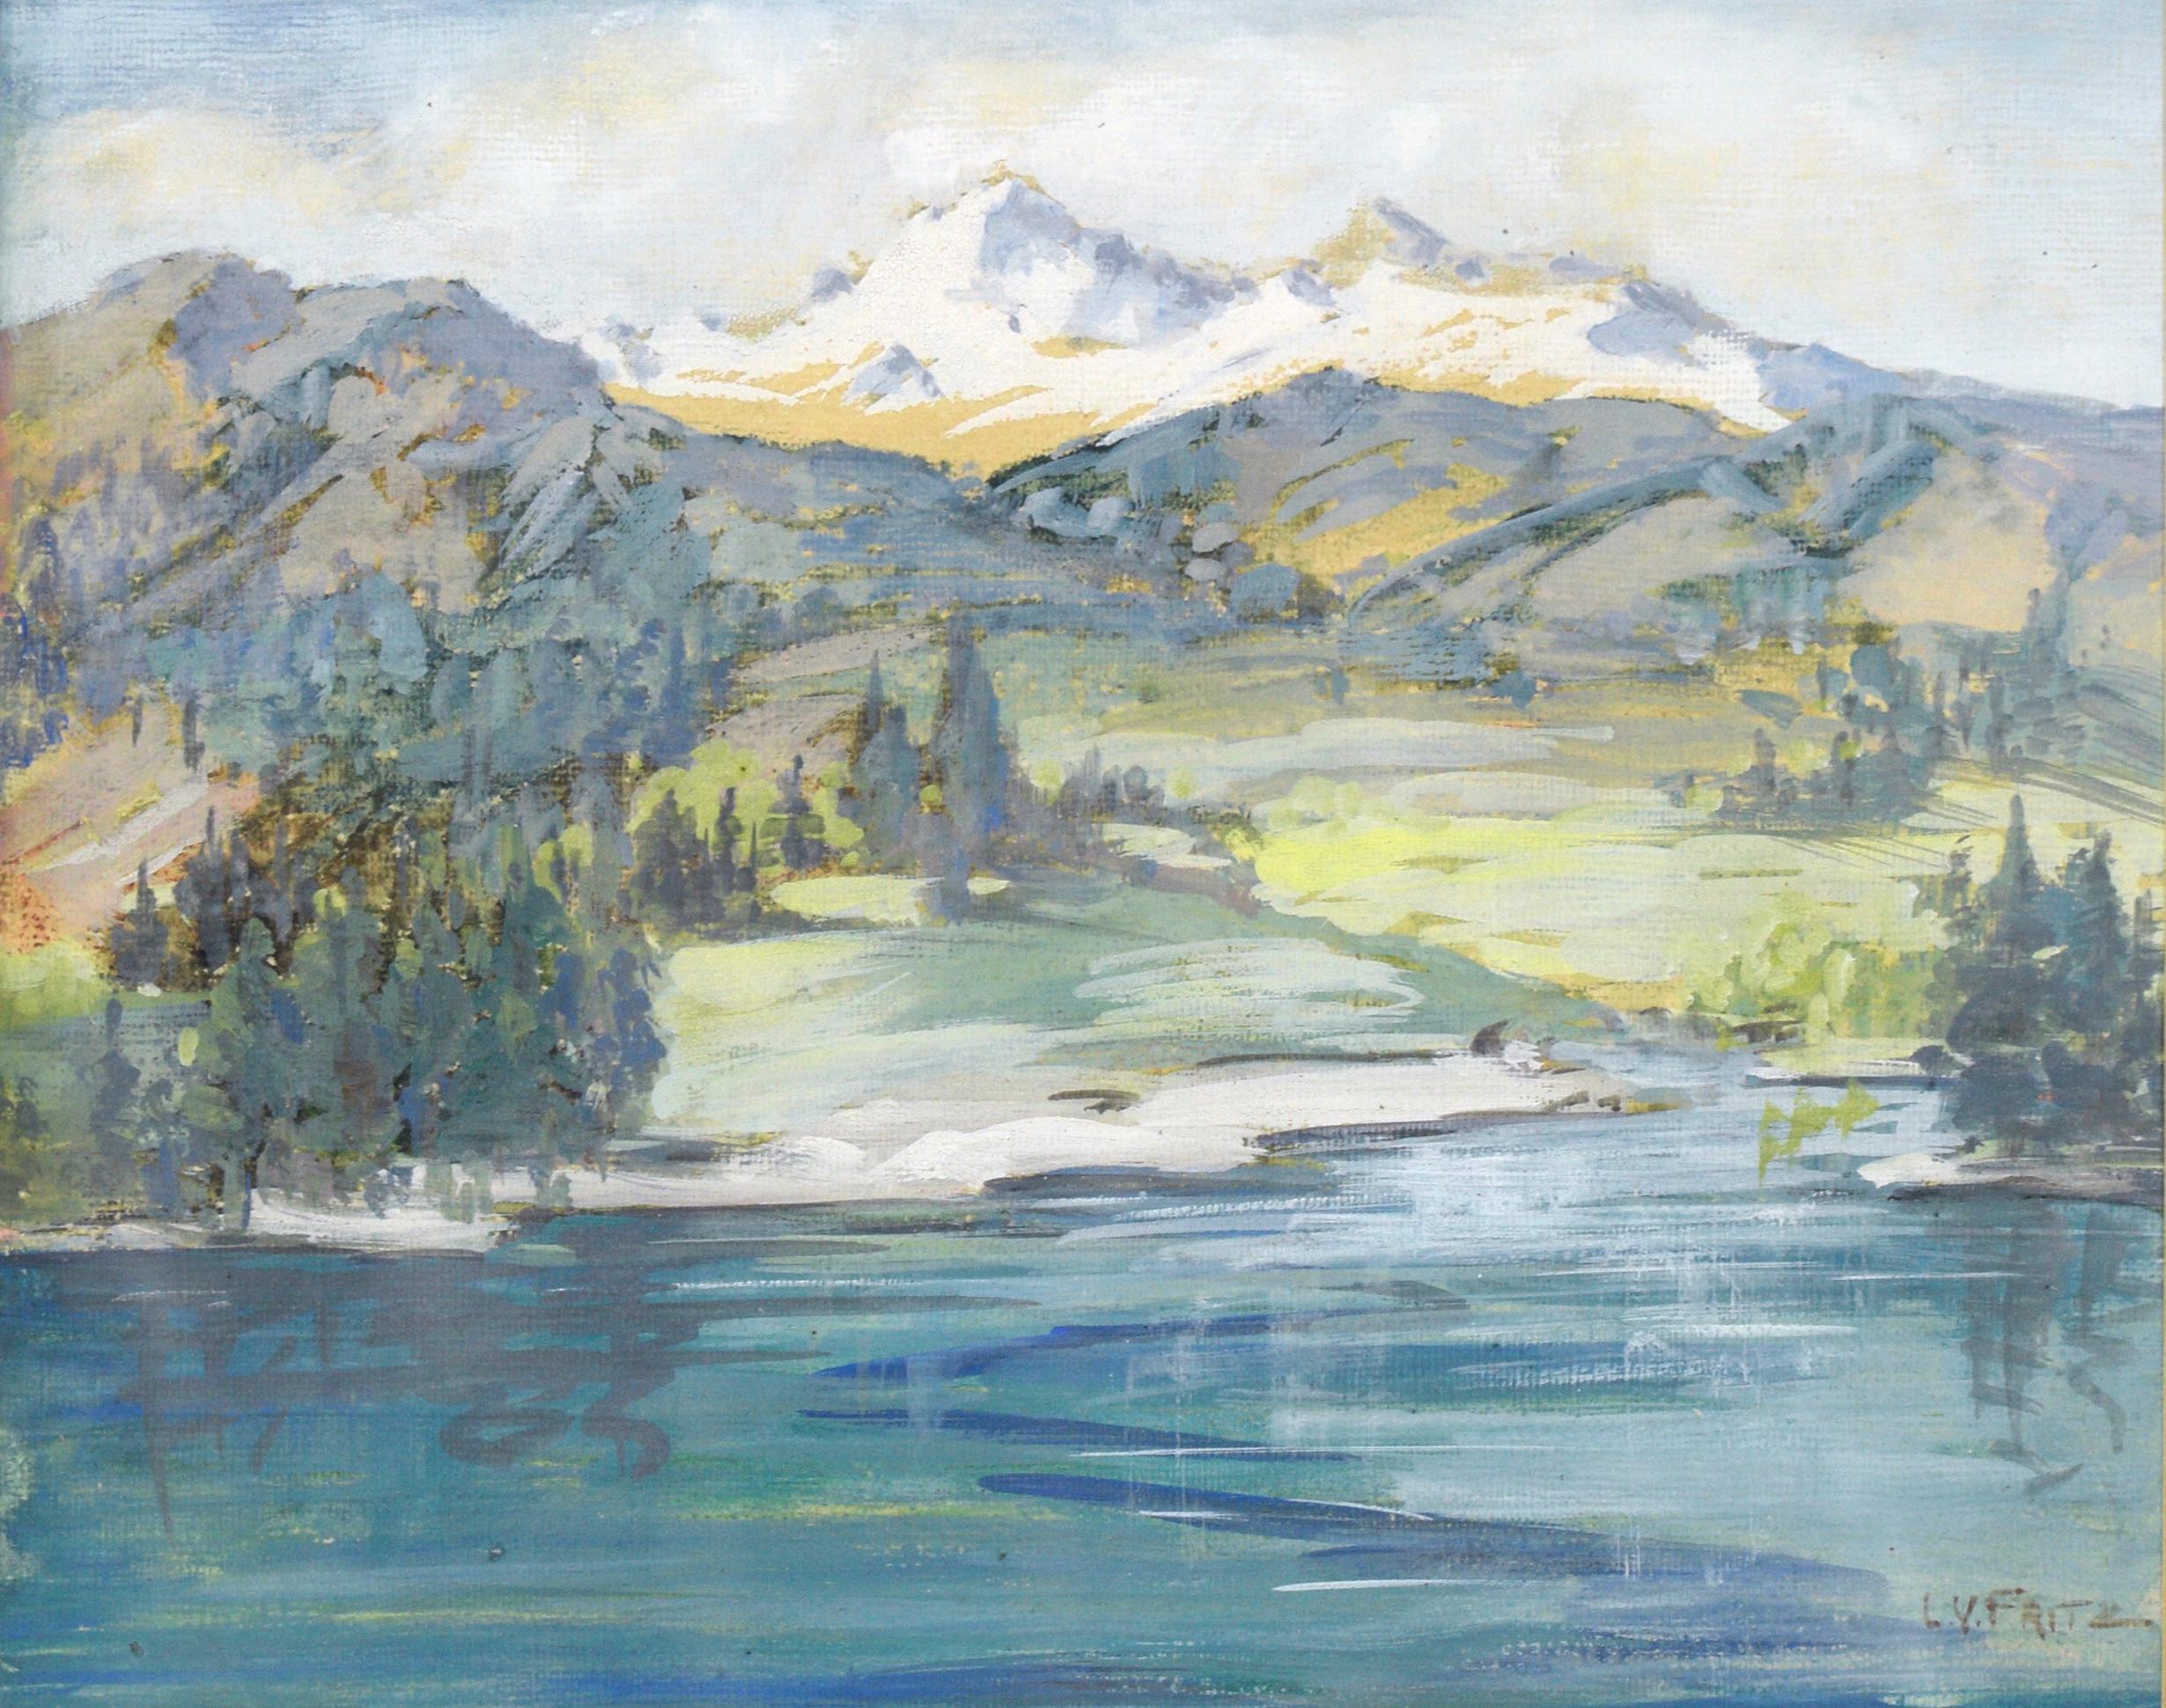 Three Sisters, Oregon - Lakeside Landscape - Painting by L. V. Fritz